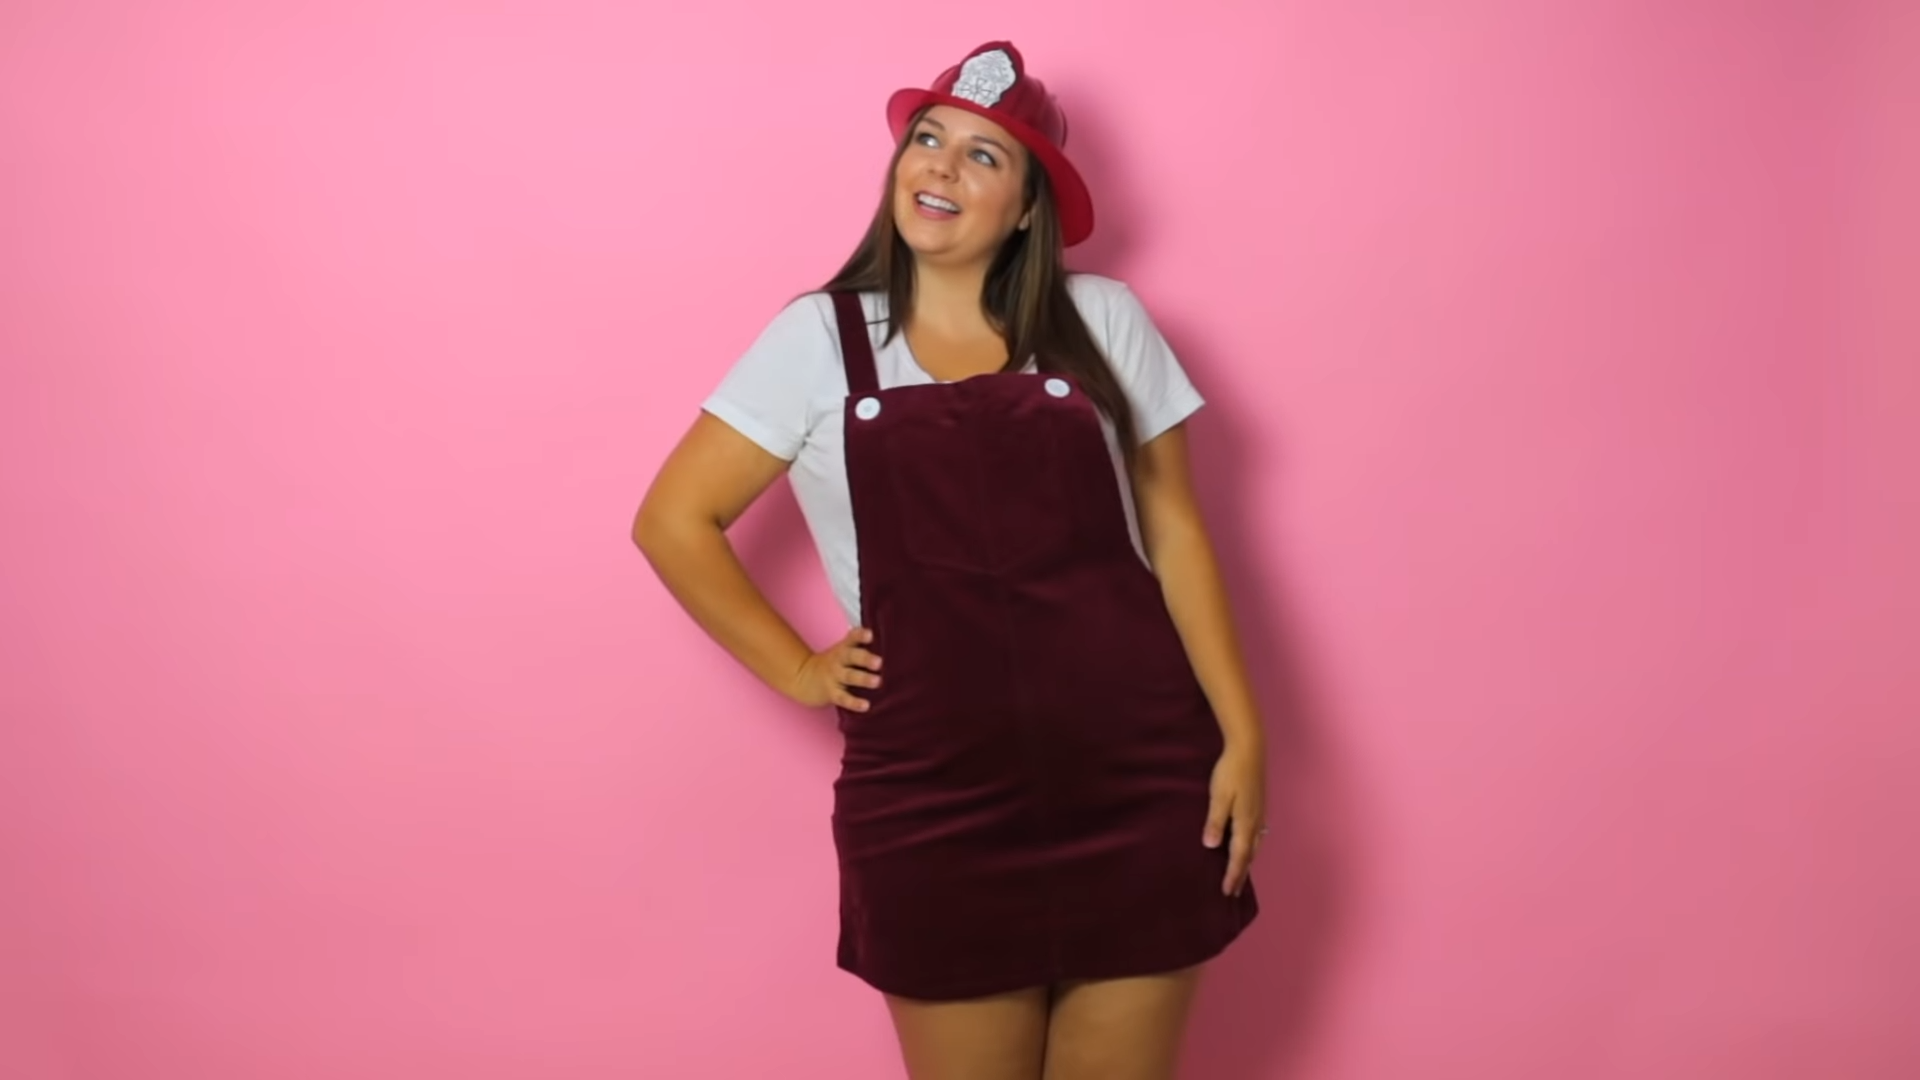 Cute Halloween Costume Ideas You Never Thought of